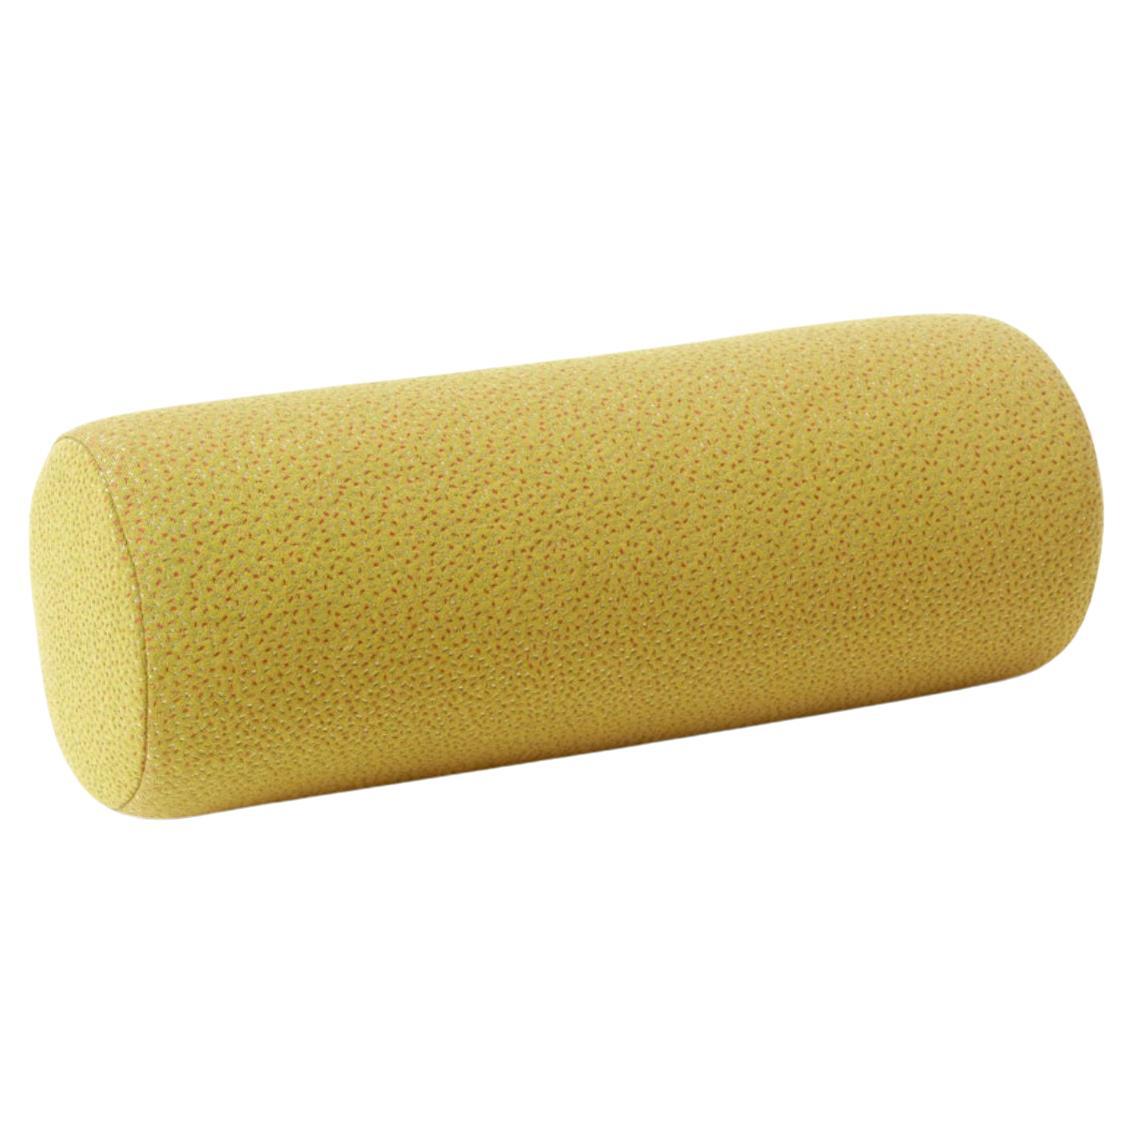 Galore Cushion Sprinkles Desert Yellow by Warm Nordic For Sale